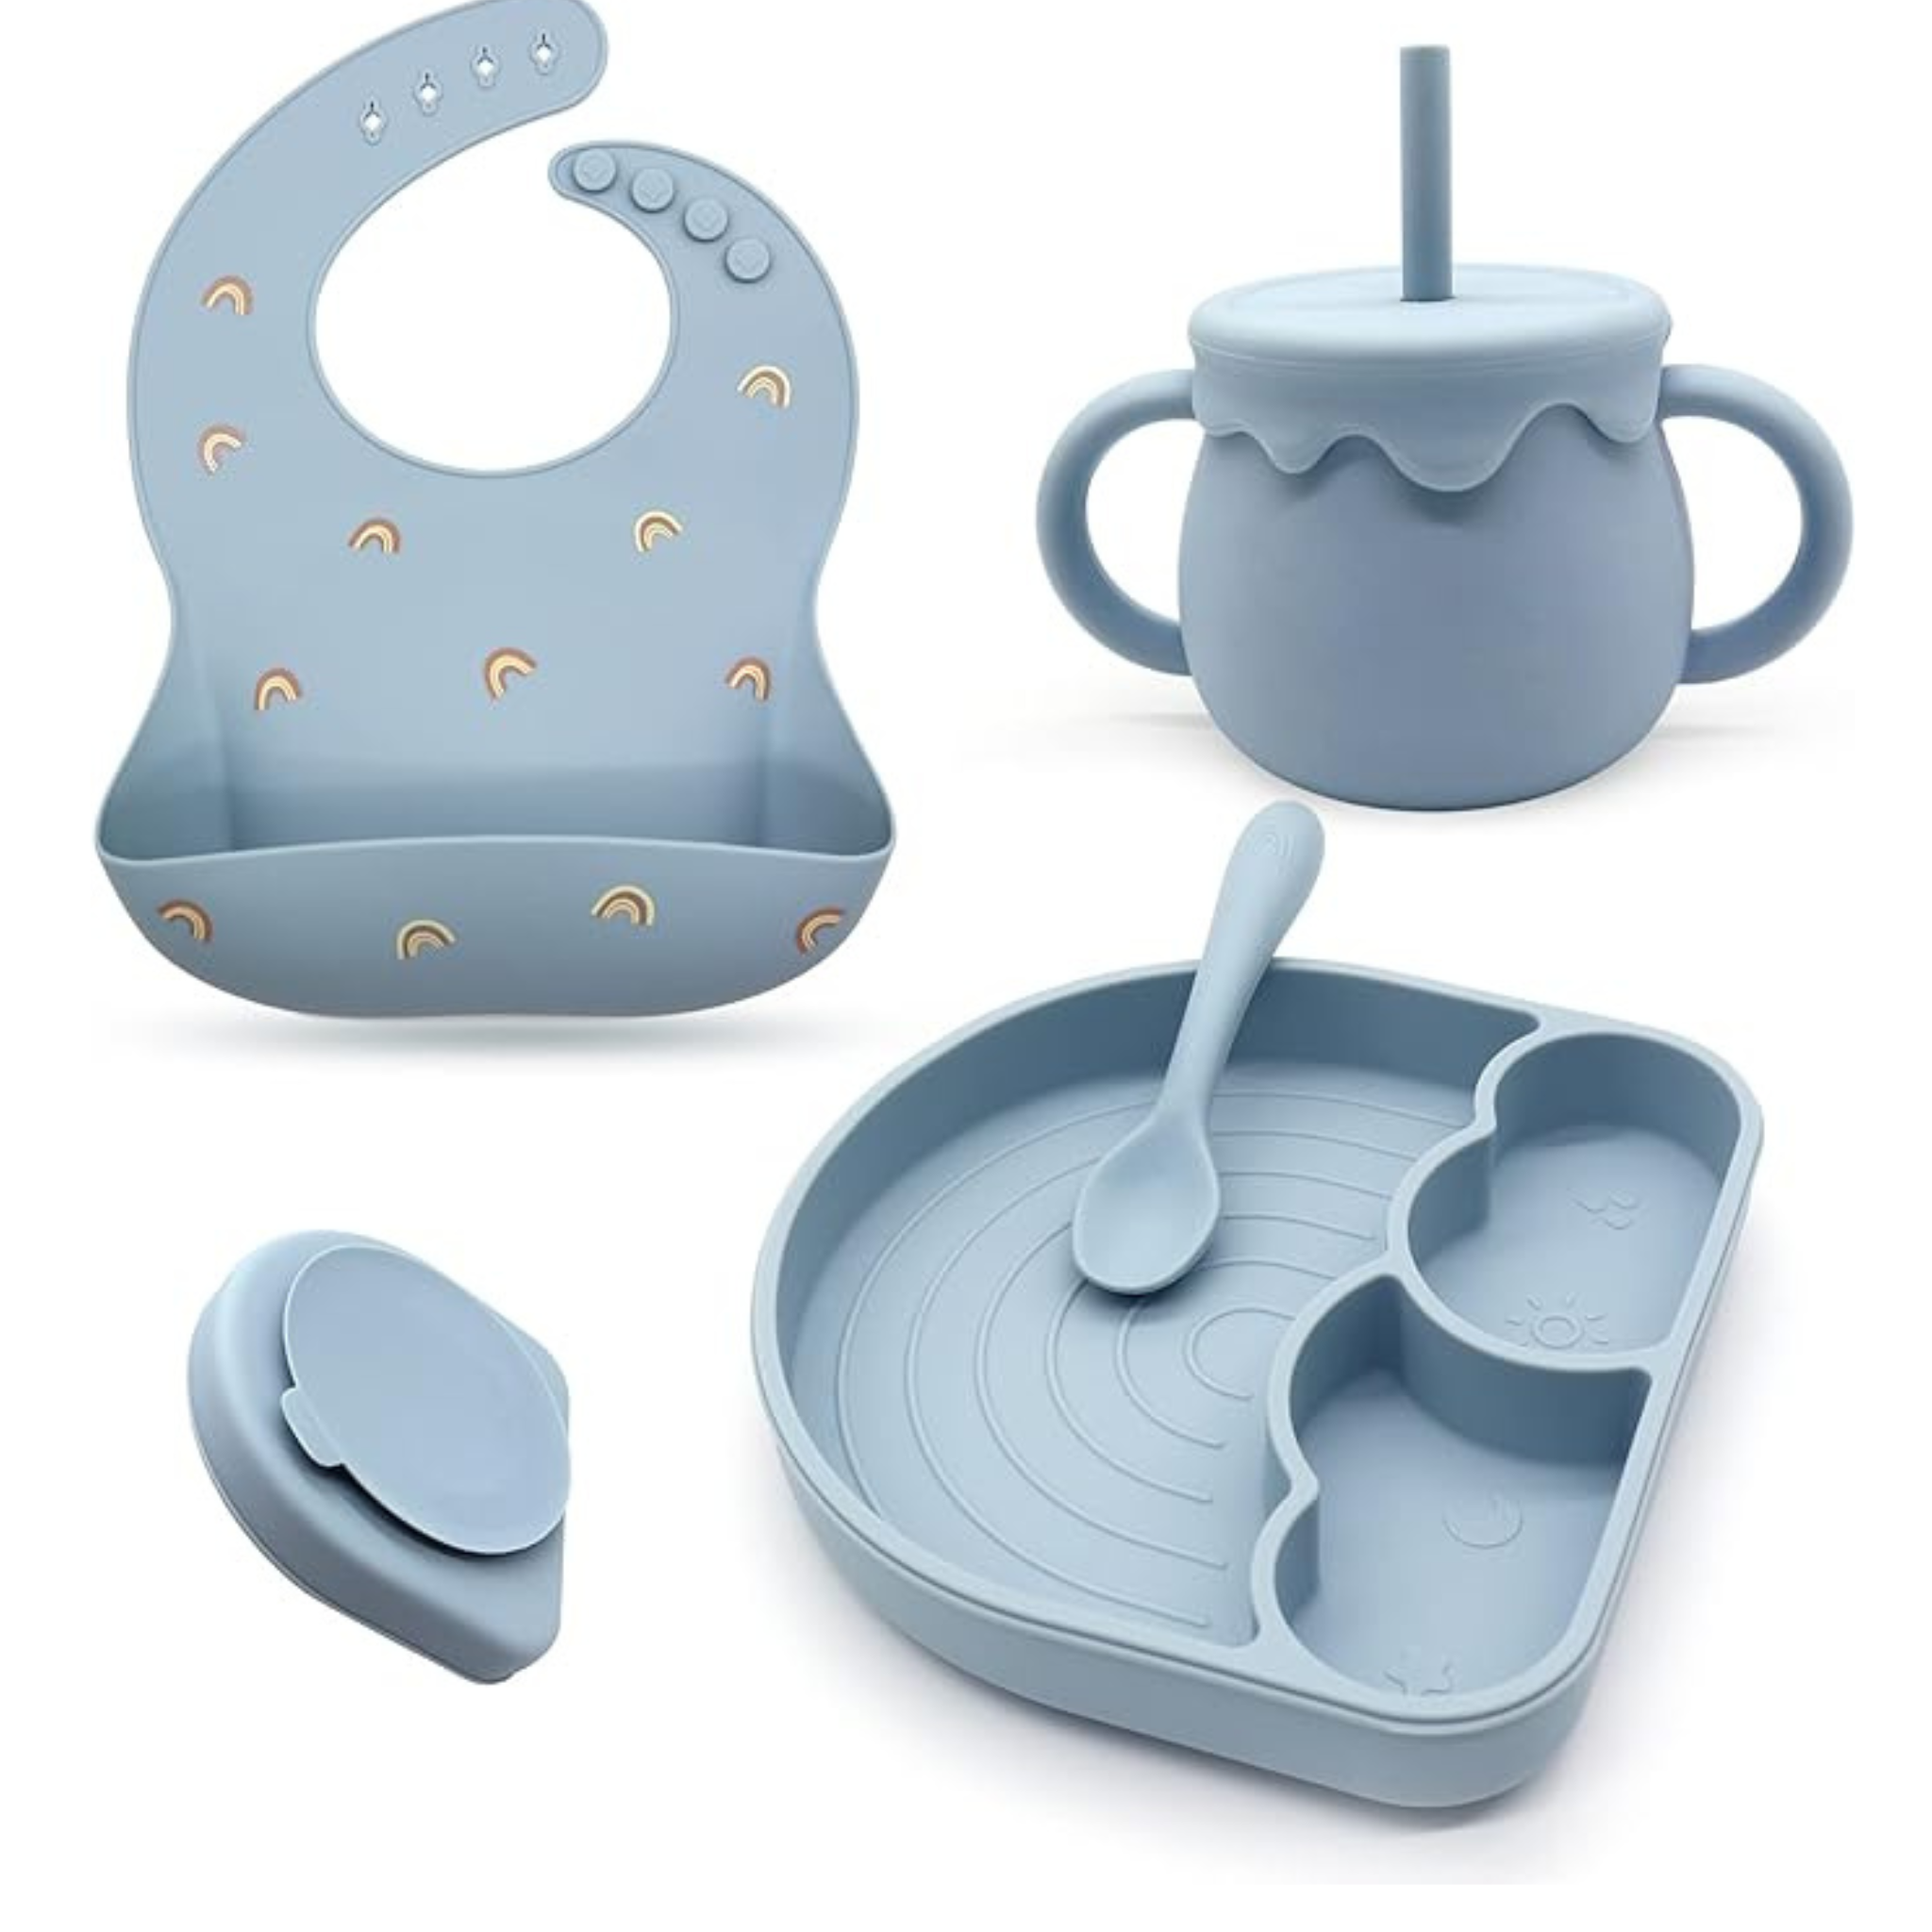 Baby Feeding Set: Divided Plate, Silicone Bib, Sippy Cup, and Spoon